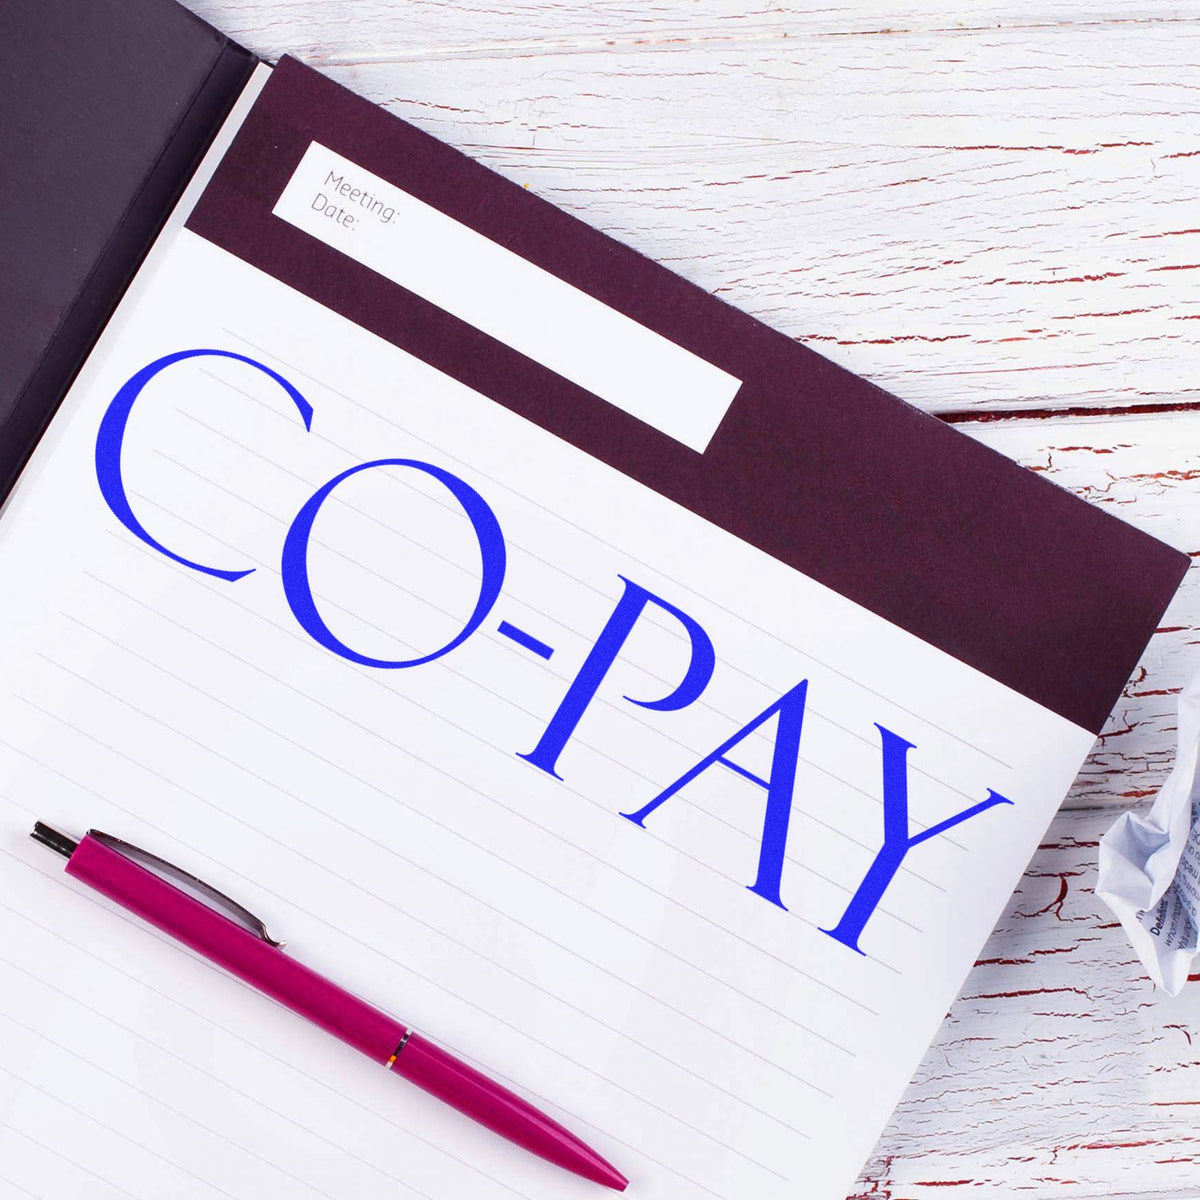 Large Co Pay Rubber Stamp In Use Photo